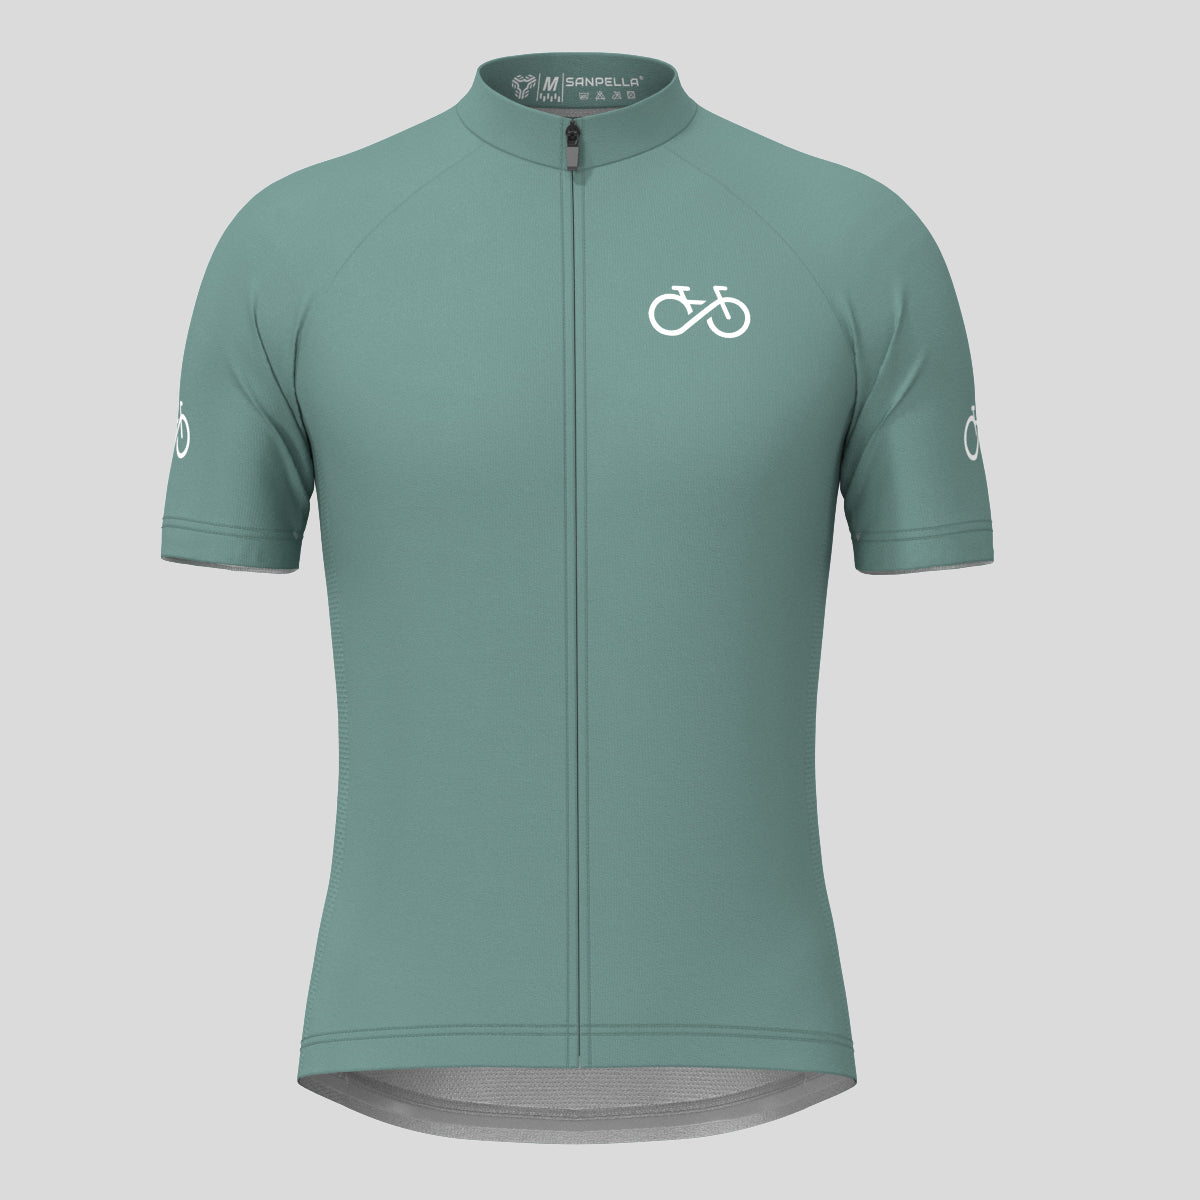 Ride Forever Men's Cycling Jersey -Sage